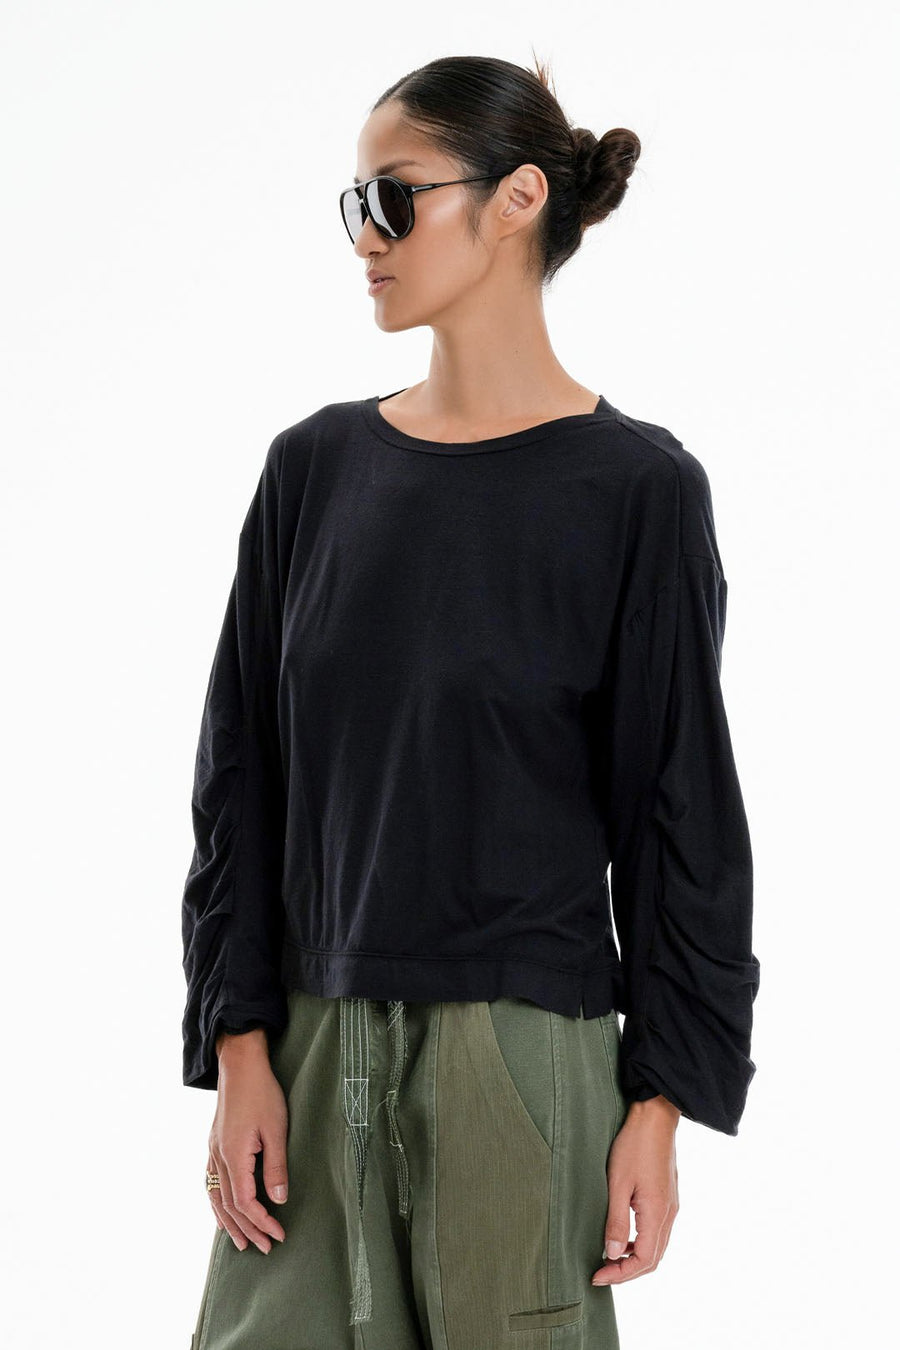 P.C.H. ROUCHED SLEEVE SHIRT, BLACK - Burning Torch Online Boutique